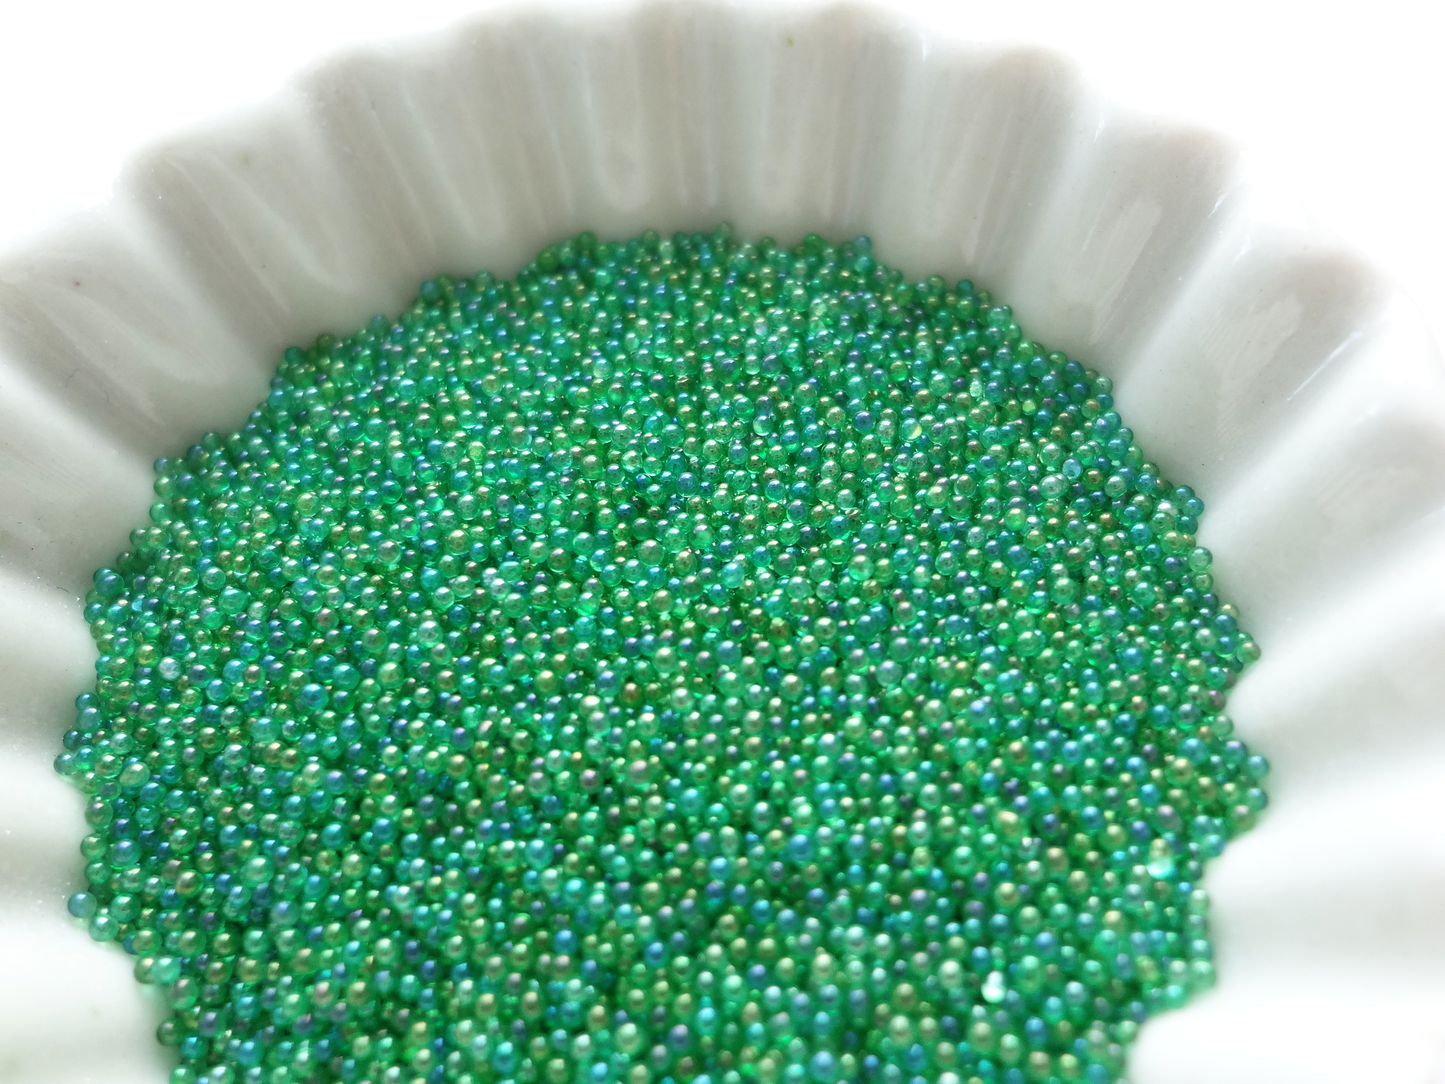 0.6-0.8mm IRIDESCENT JUNGLE GREEN Clear AB Microbeads